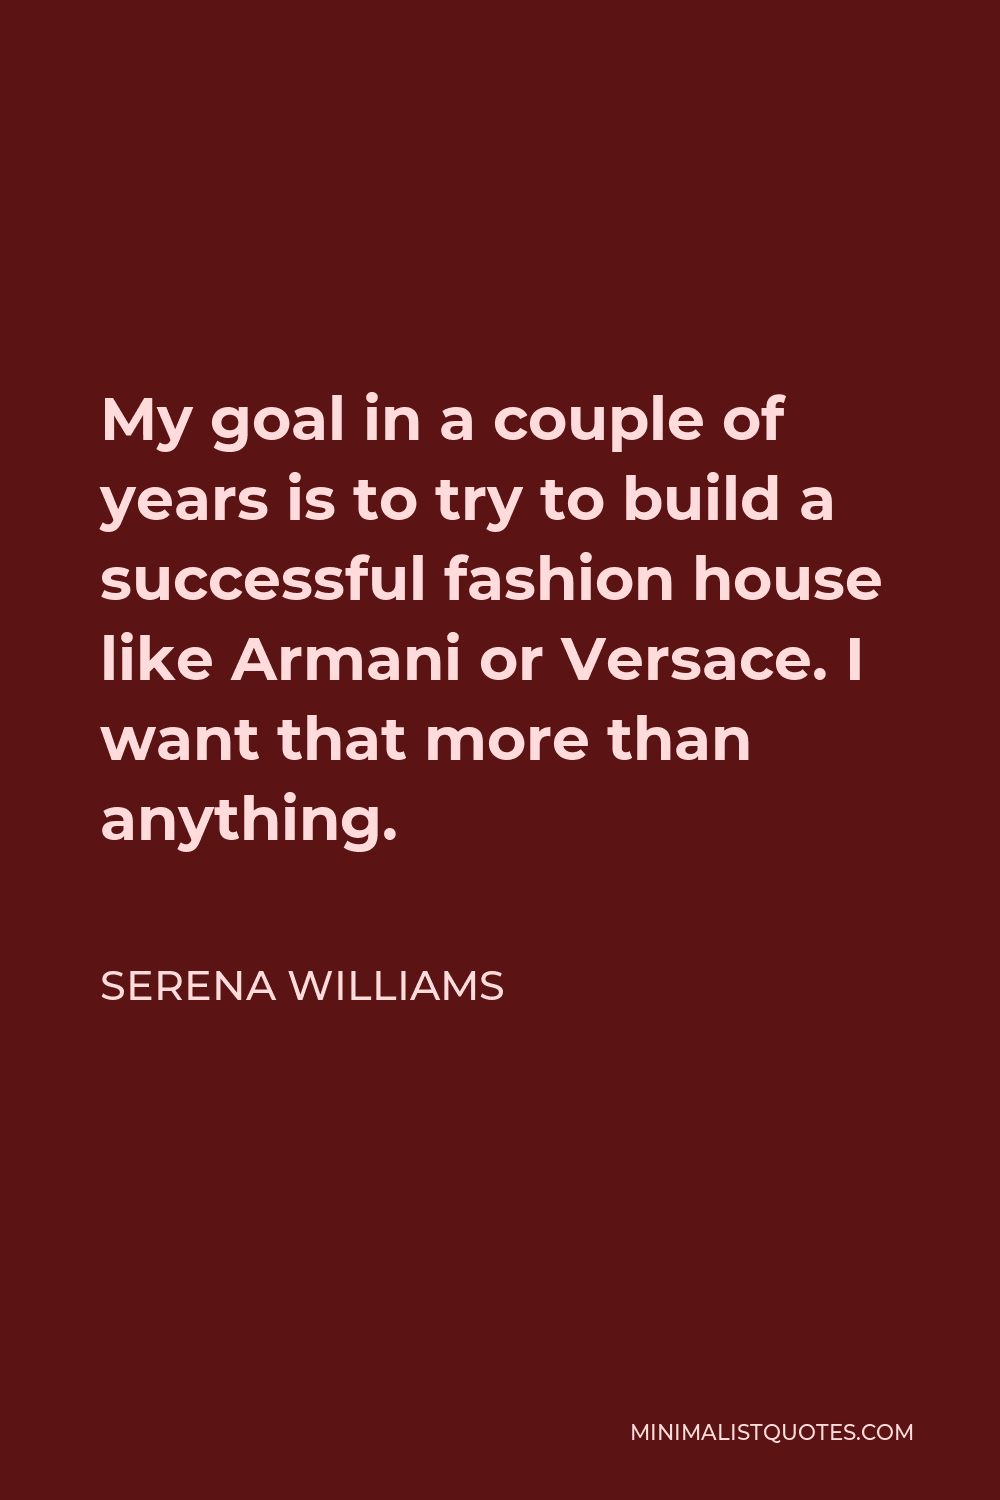 Serena Williams Quote - My goal in a couple of years is to try to build a successful fashion house like Armani or Versace. I want that more than anything.